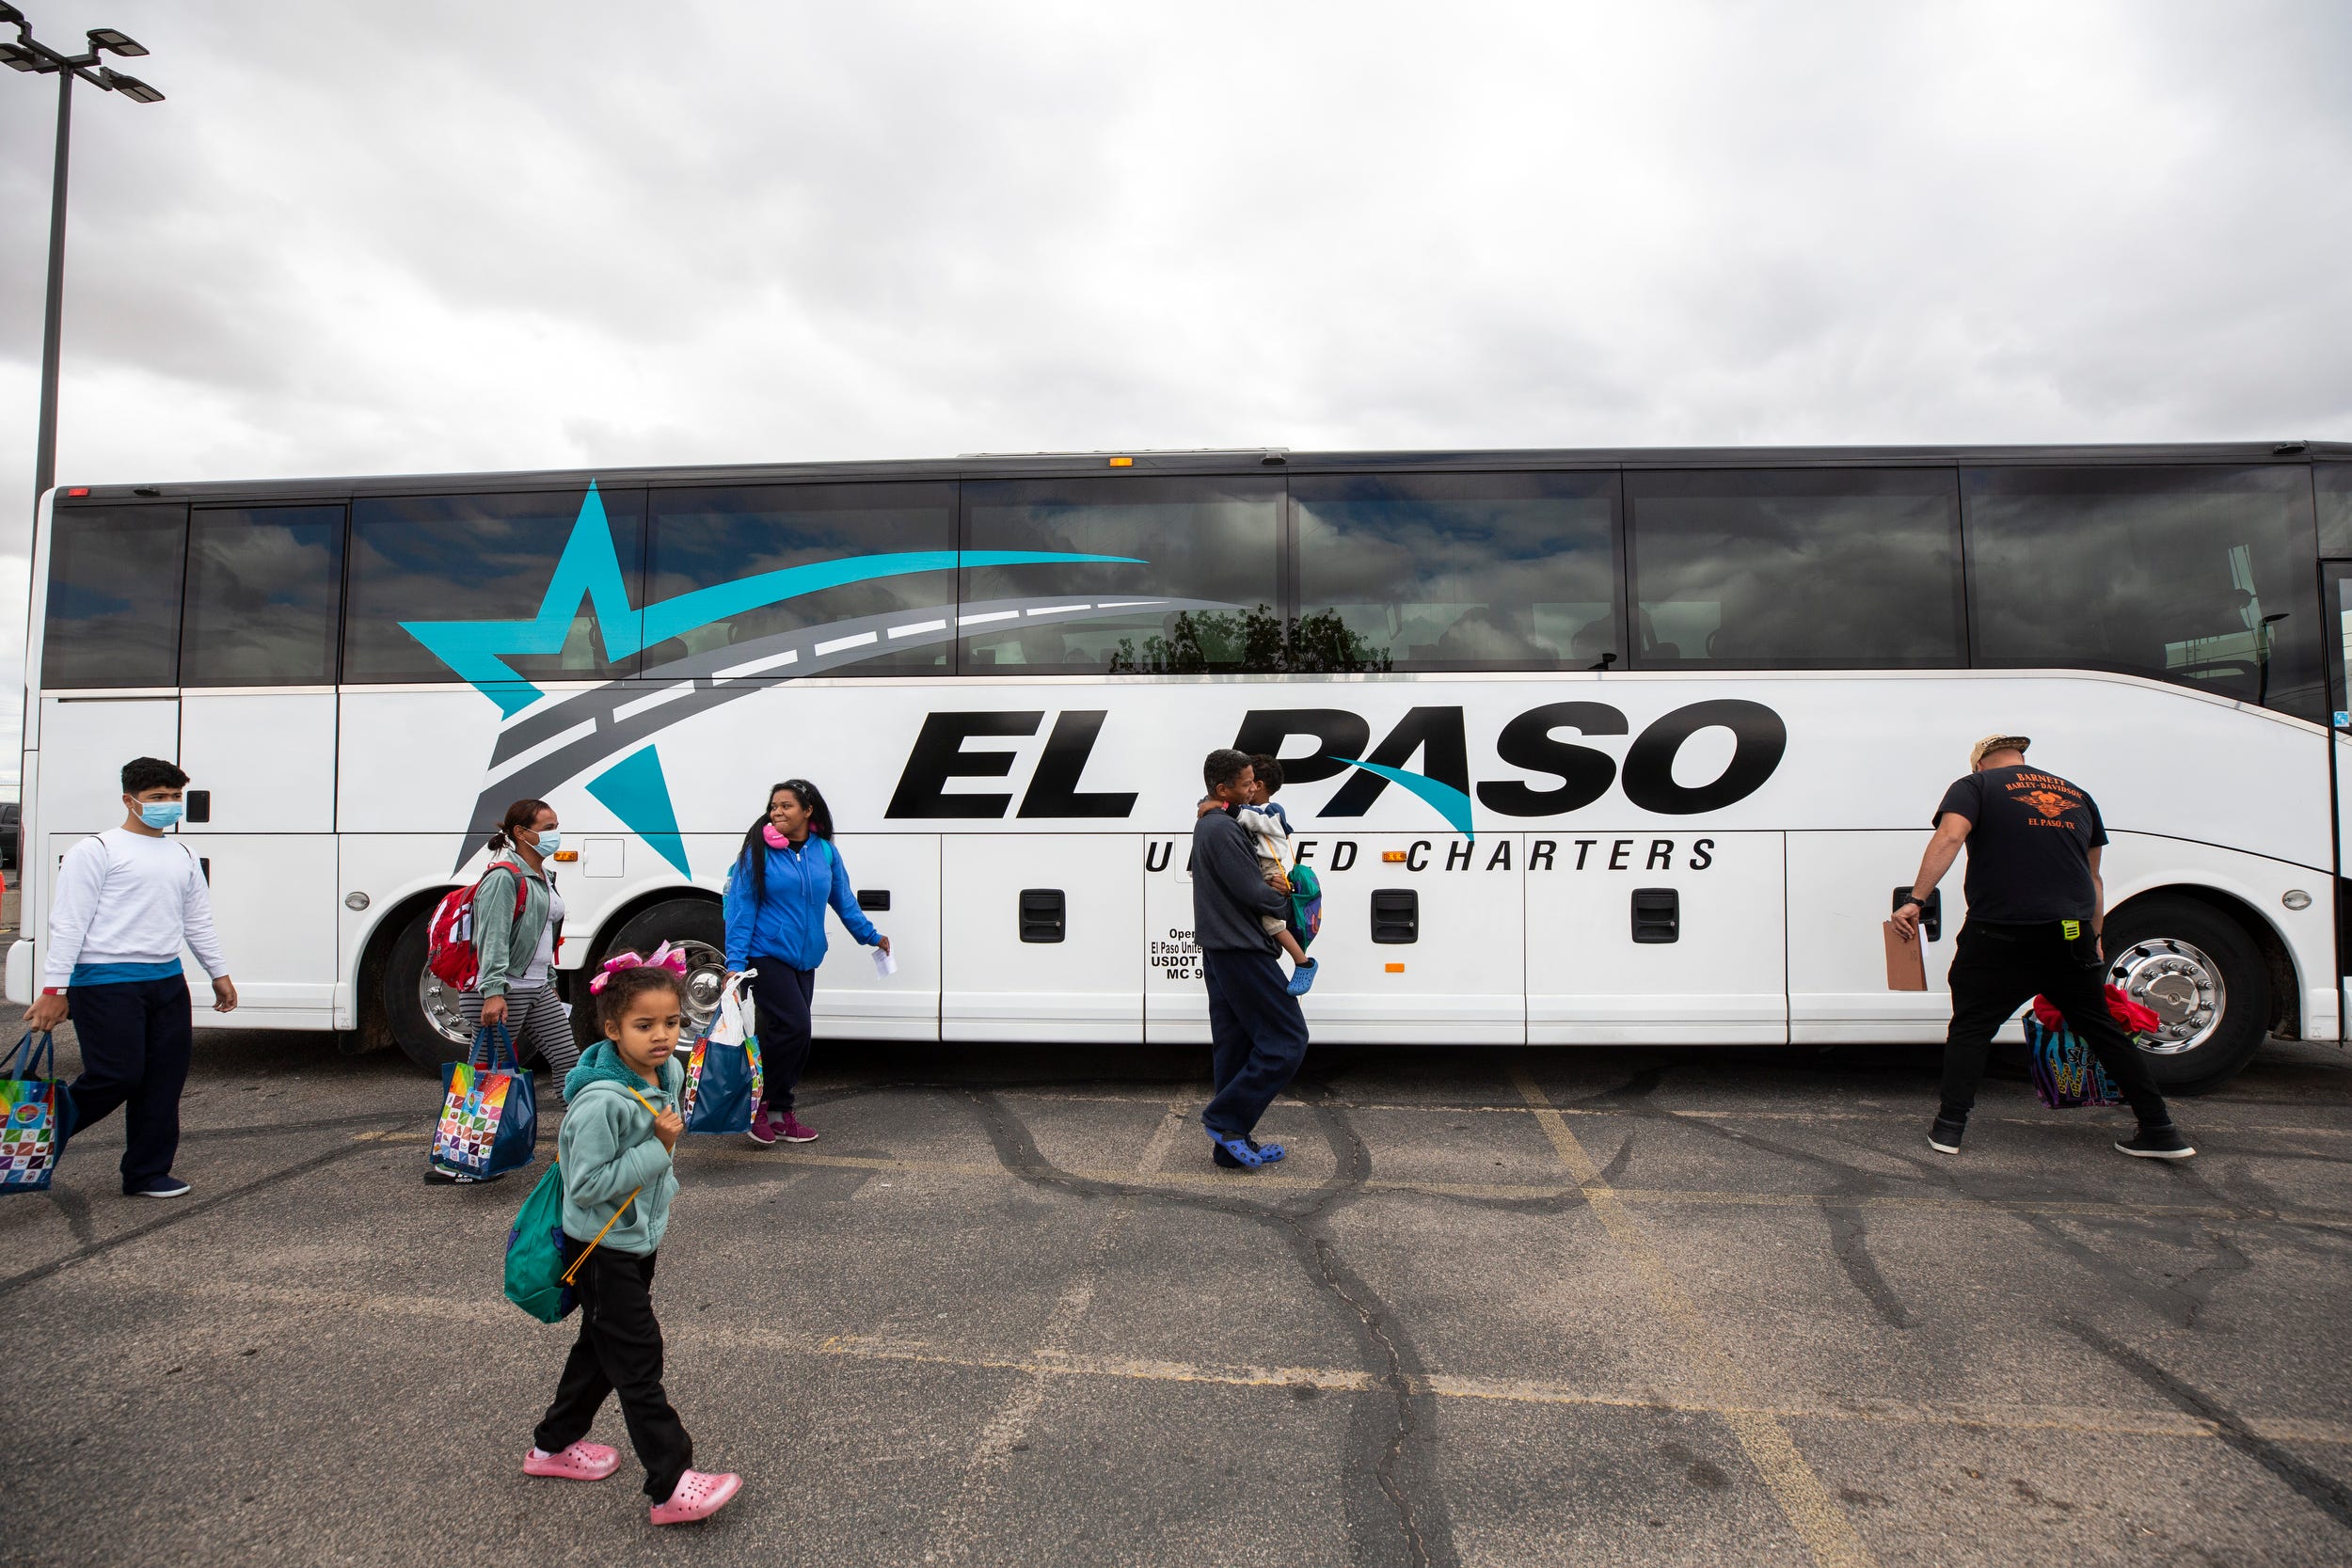 Kristian Gonzalez Perez, his wife Katiuska Carolina Leal Moreno and their two children get ready to board a bus headed to New York City from the Migrant Welcome Center in El Paso, Texas.